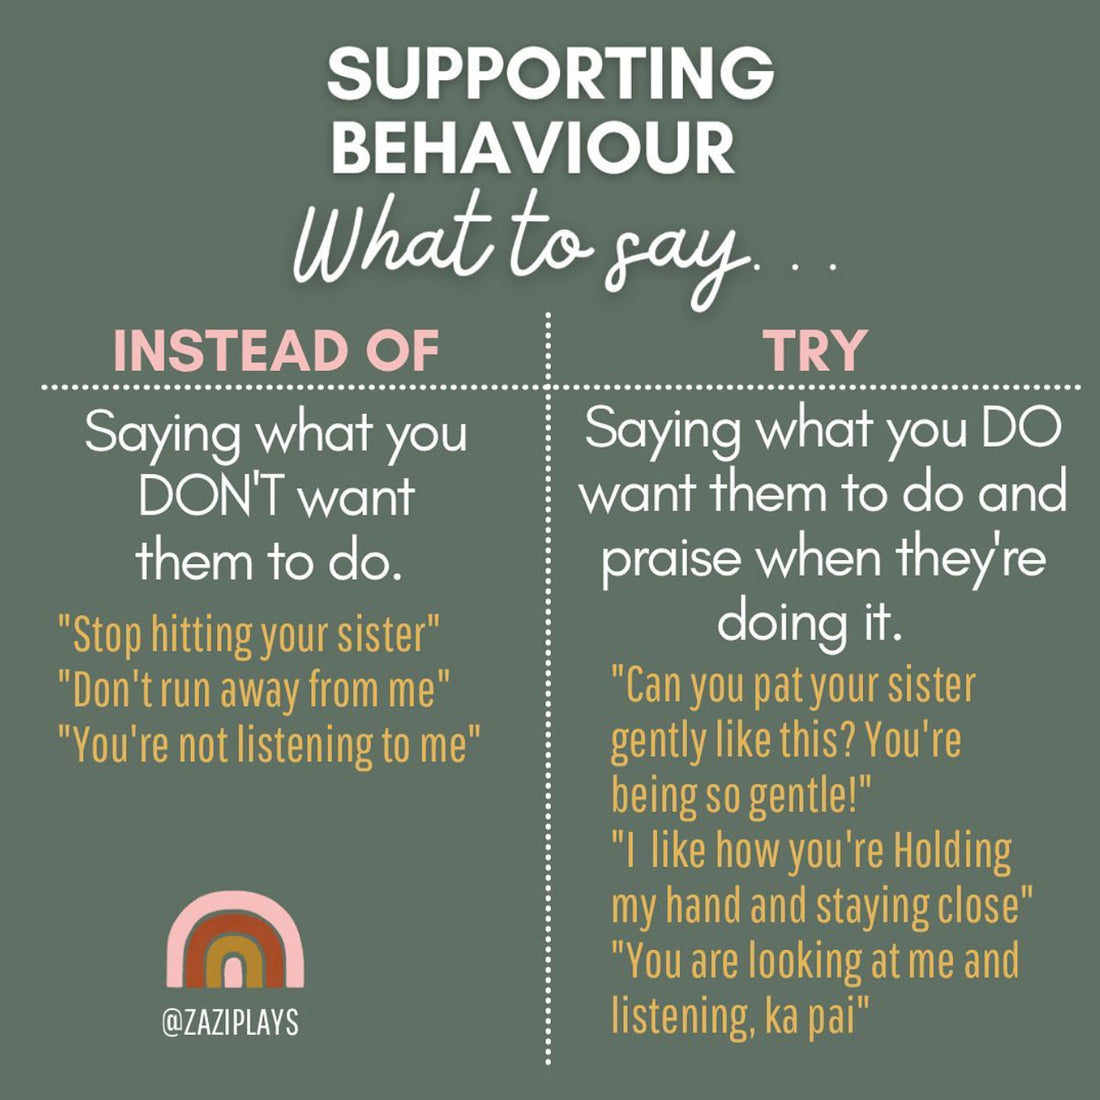 Supporting Behaviour: What to say